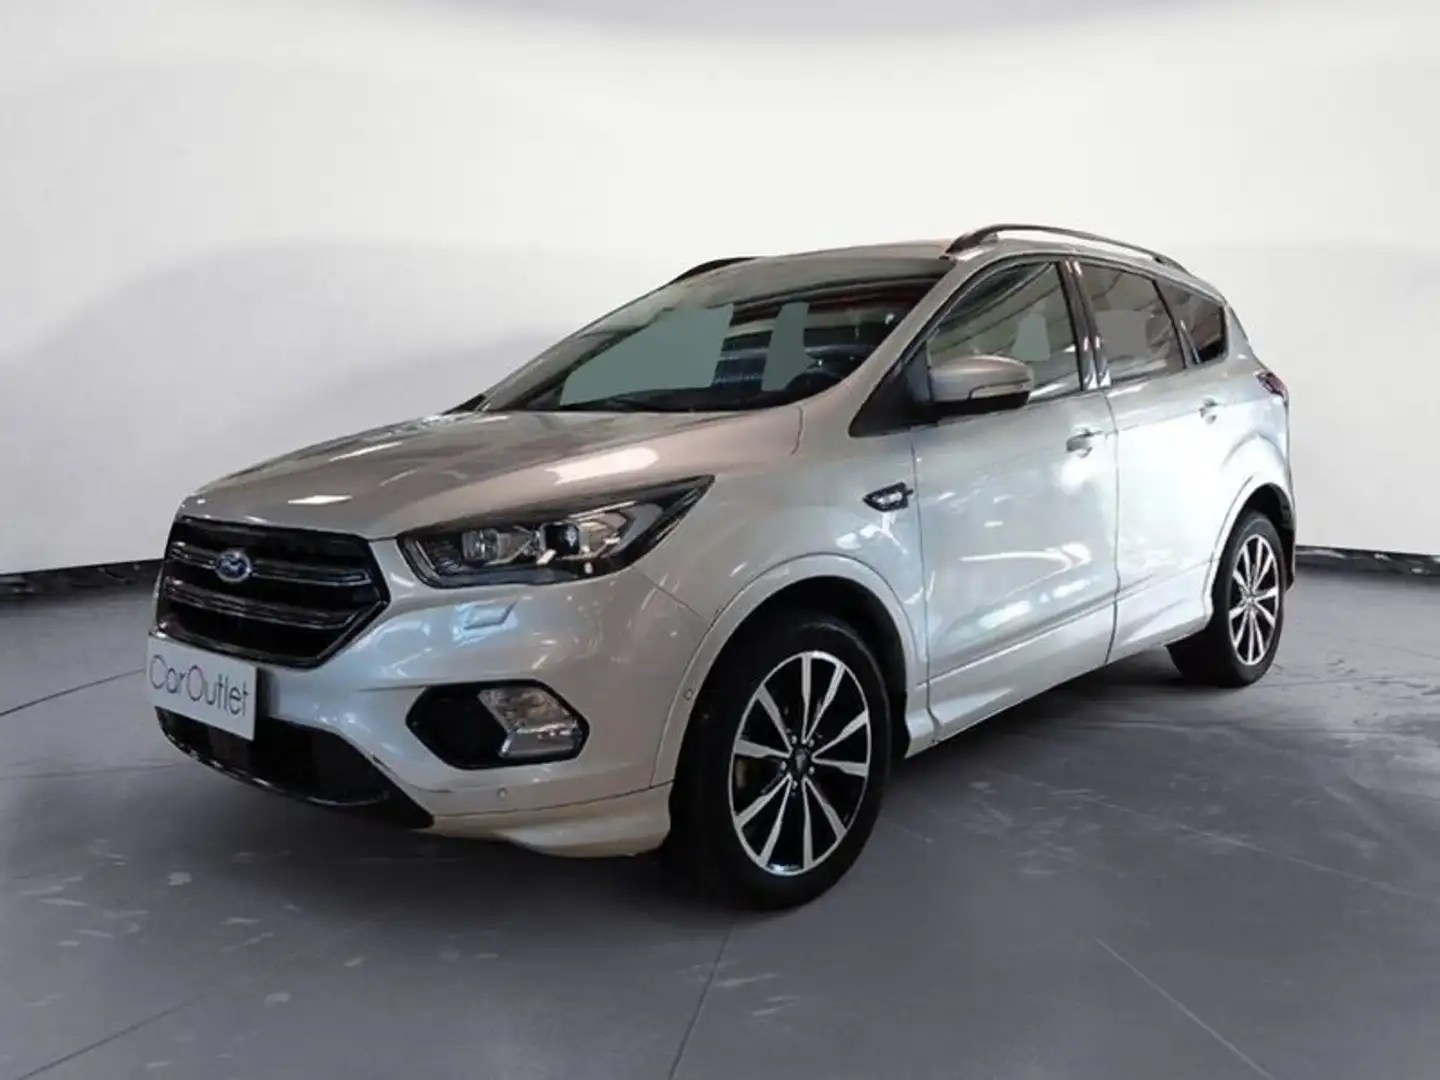 Ford Kuga 2.0 TDCI 150 CV S&S Powershift 4WD ST-Line Zilver - 1